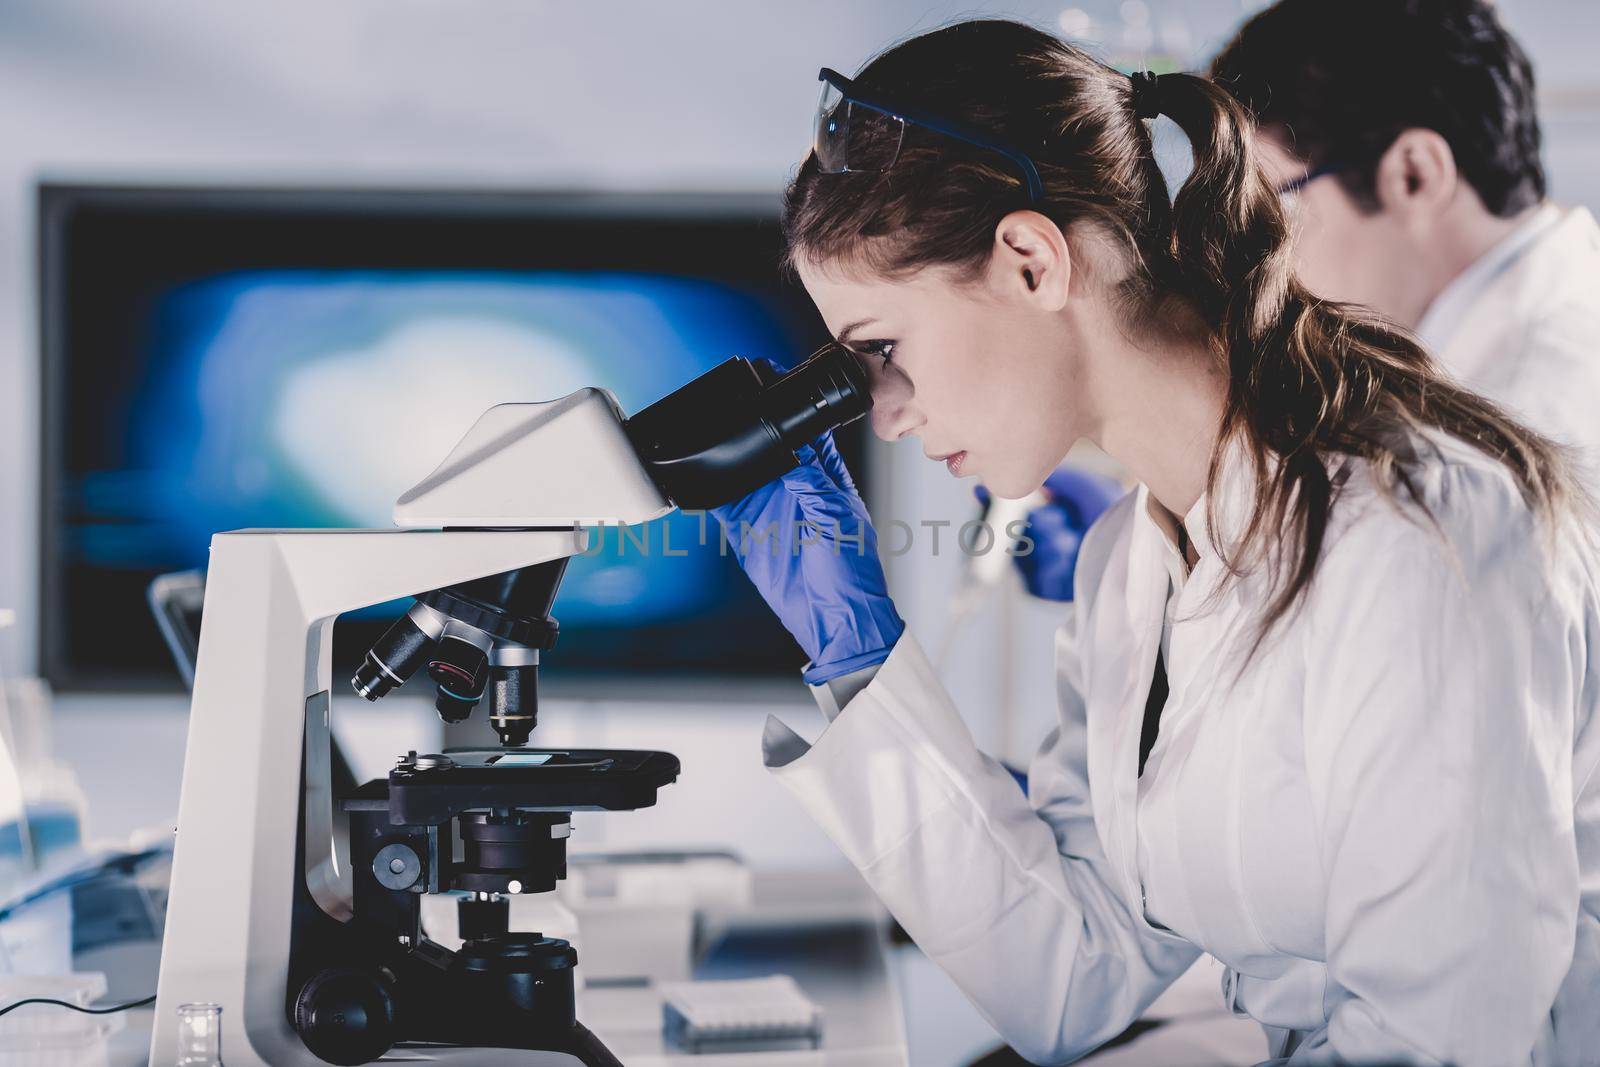 Life scientists researching in laboratory. Attractive female young scientist and her post doctoral supervisor microscoping in their working environment. Healthcare and biotechnology.